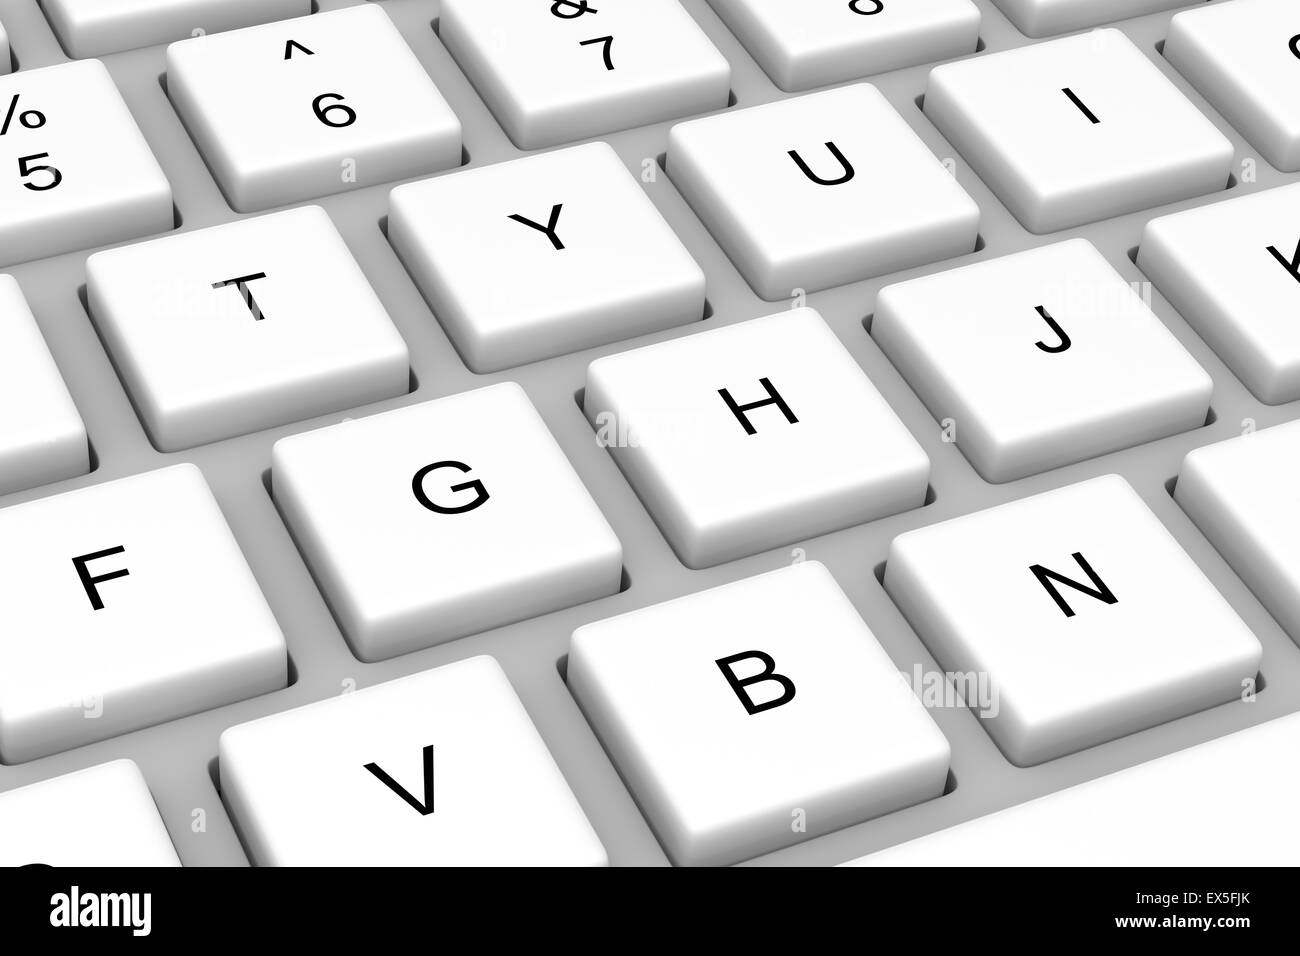 White Personal Computer Keyboard Close-up 3D Illustration Stock Photo